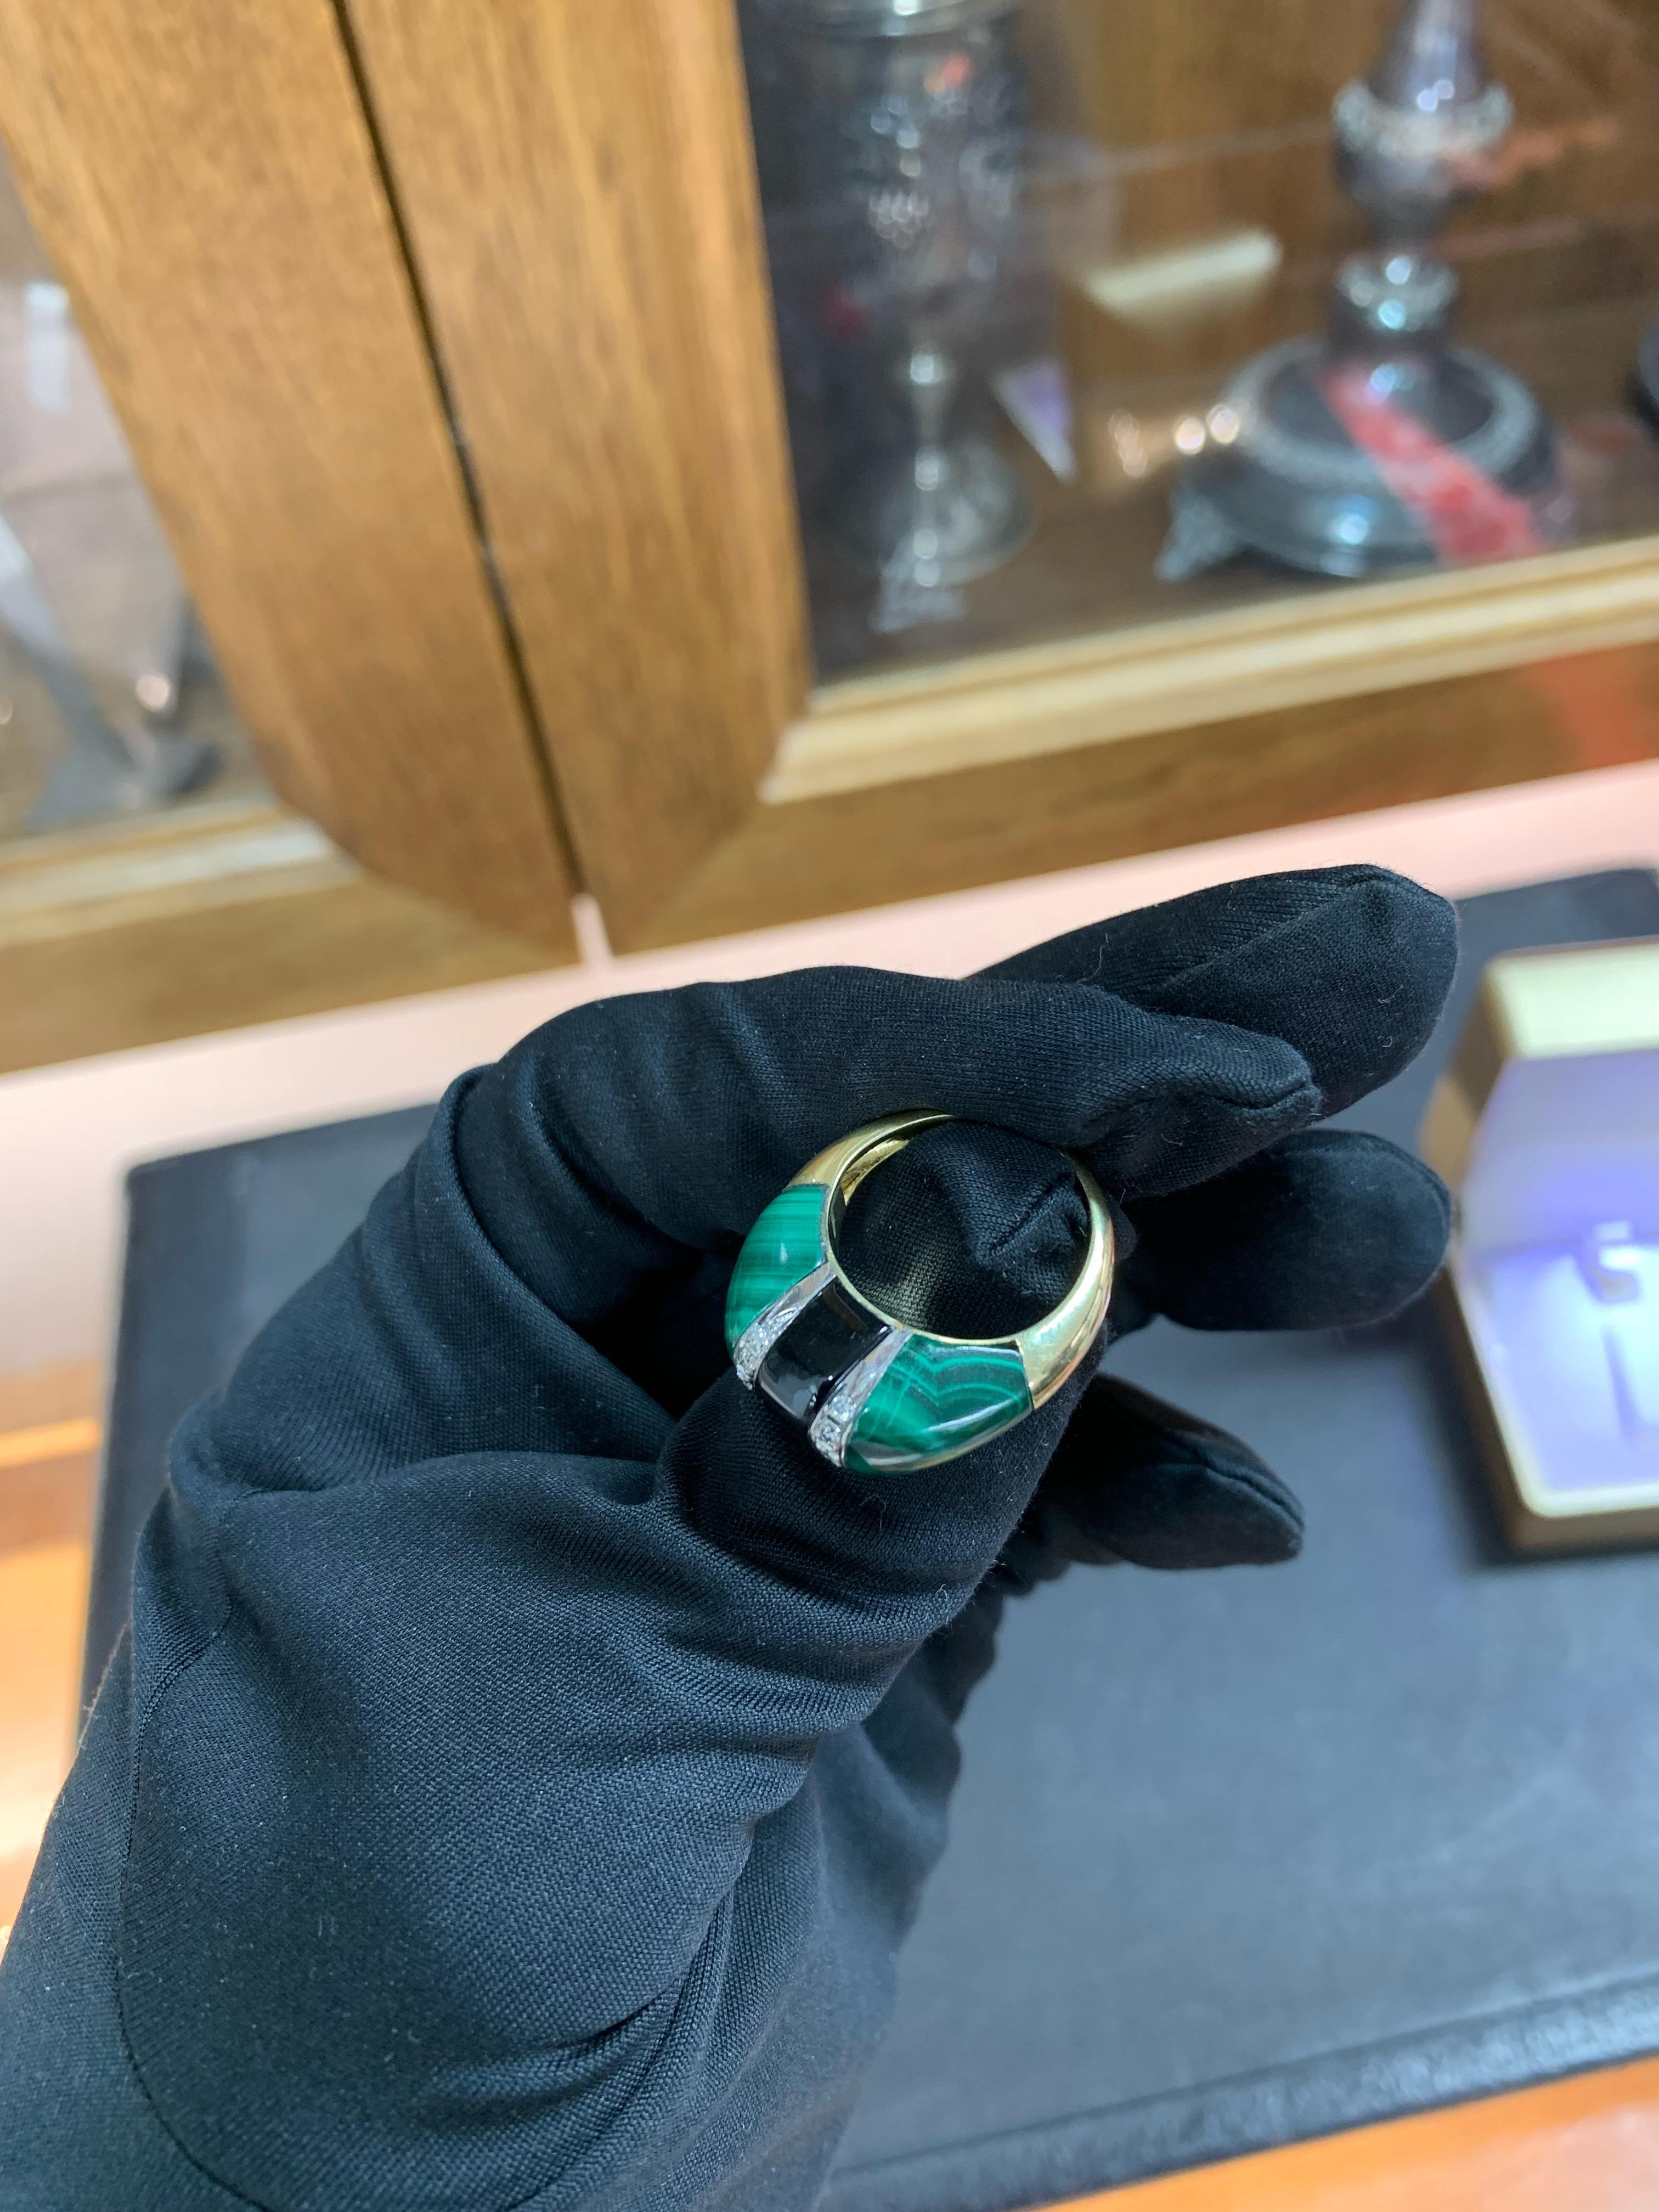 Beautifully Hand Crafted 18k Yellow Gold Cocktail /Statement Ring Set With Green Malachite, Black Onyx & Diamonds.
Amazing Shine, Incredible Craftsmanship.
Nice & Clean Stones.
Very Well Crafted.
Great Statement Piece.
